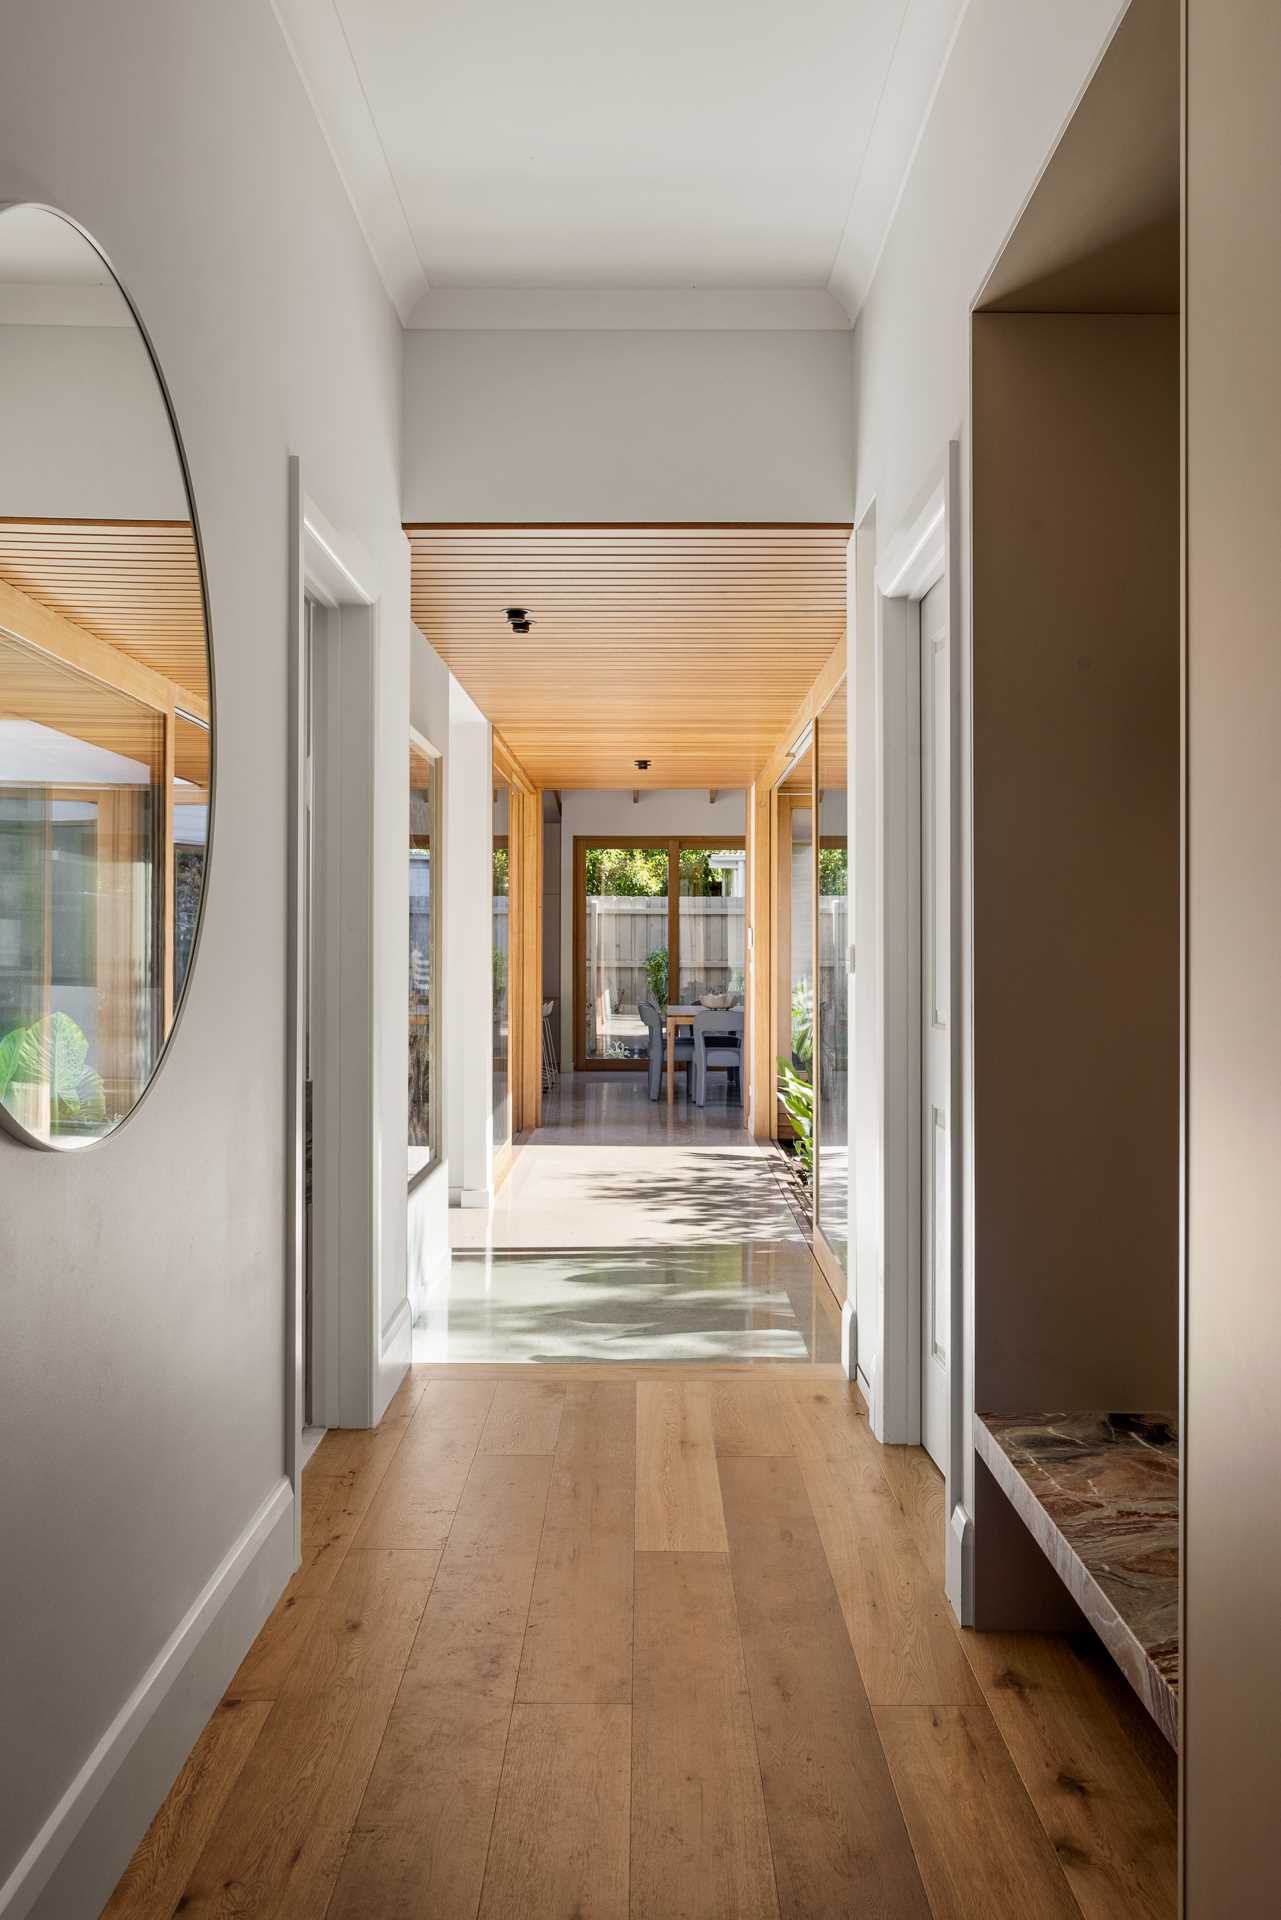 The view from the front door shows off the hallway that connects the original home with the new extension.